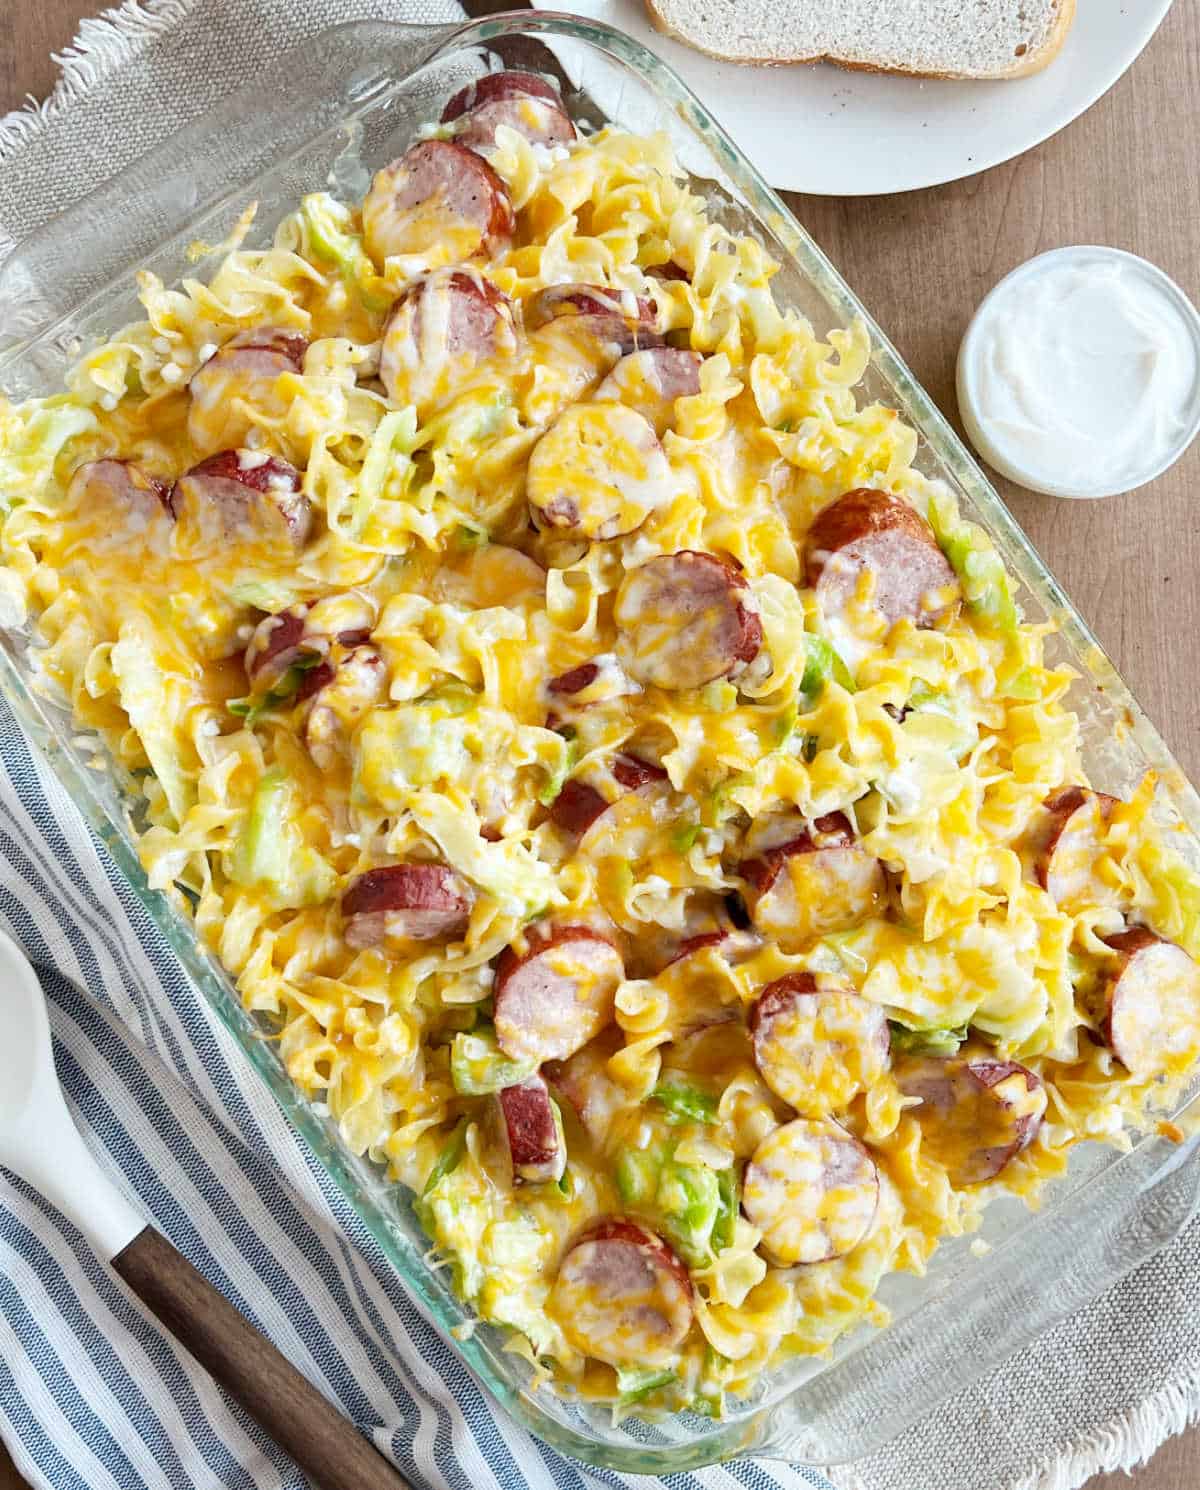 Polish casserole with cheese in baking dish.